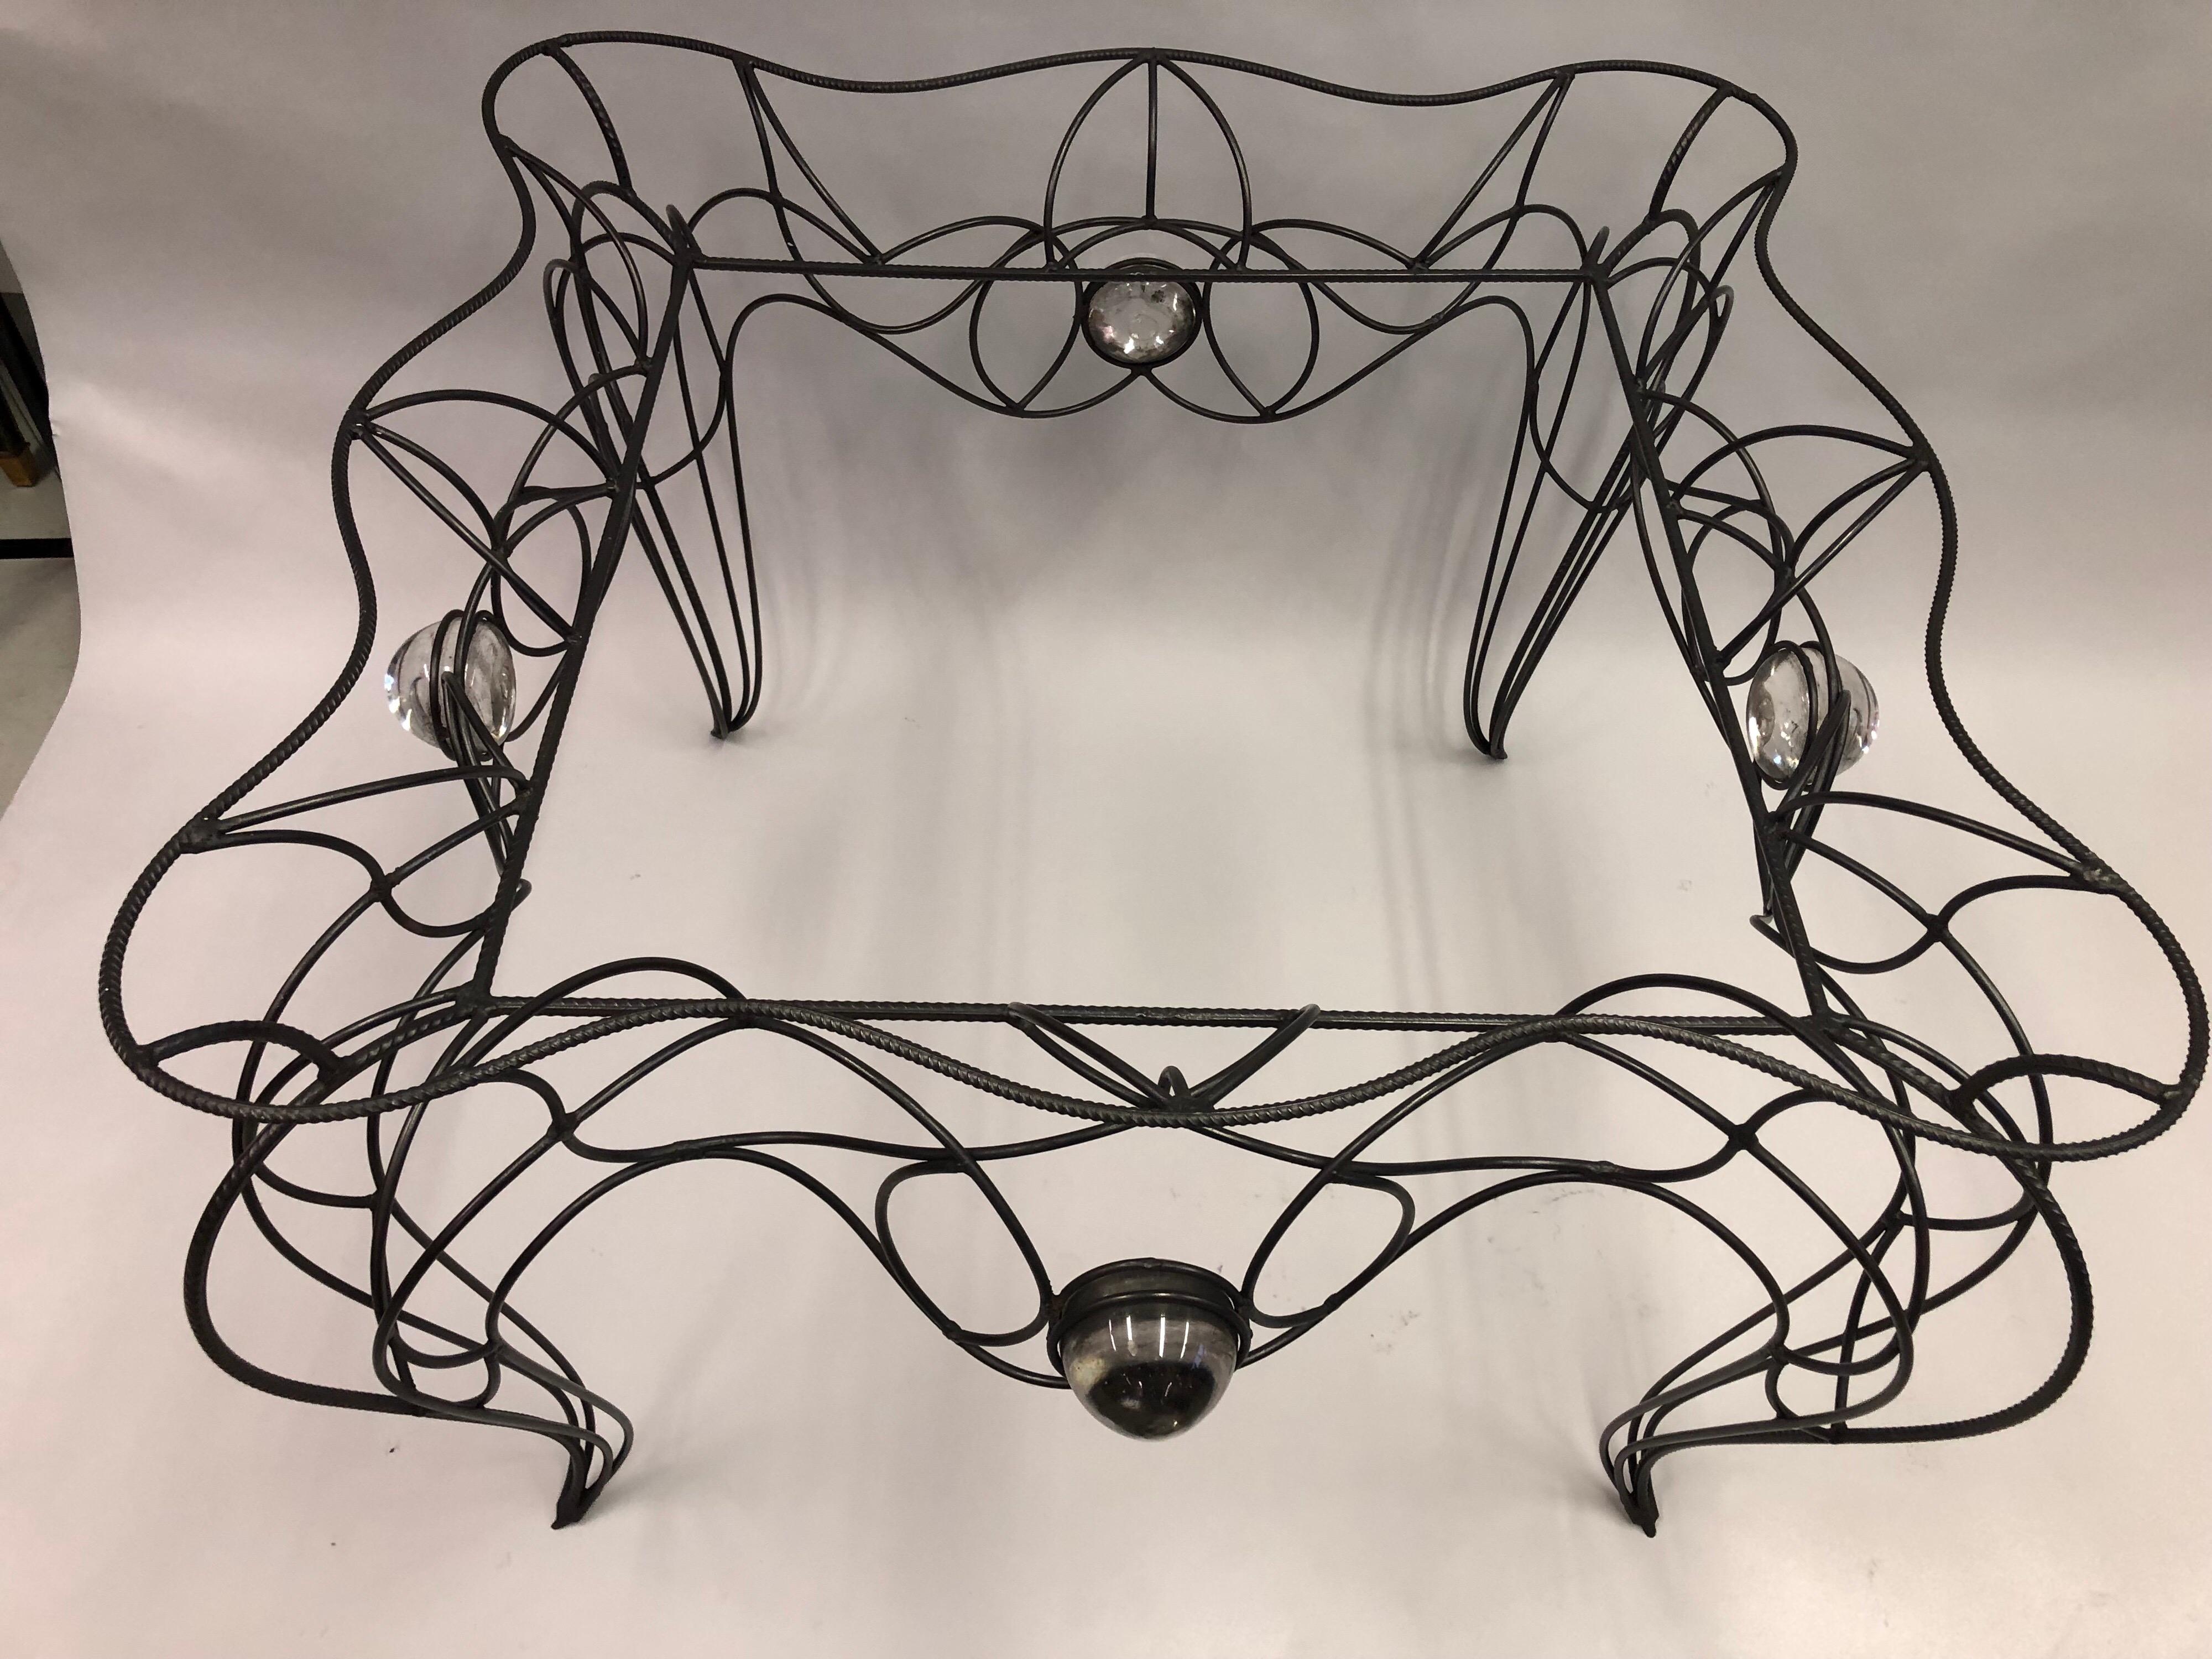 French Unique Centre Table / Console in Wrought Iron and Glass by Andre Dubreuil, 1986 For Sale